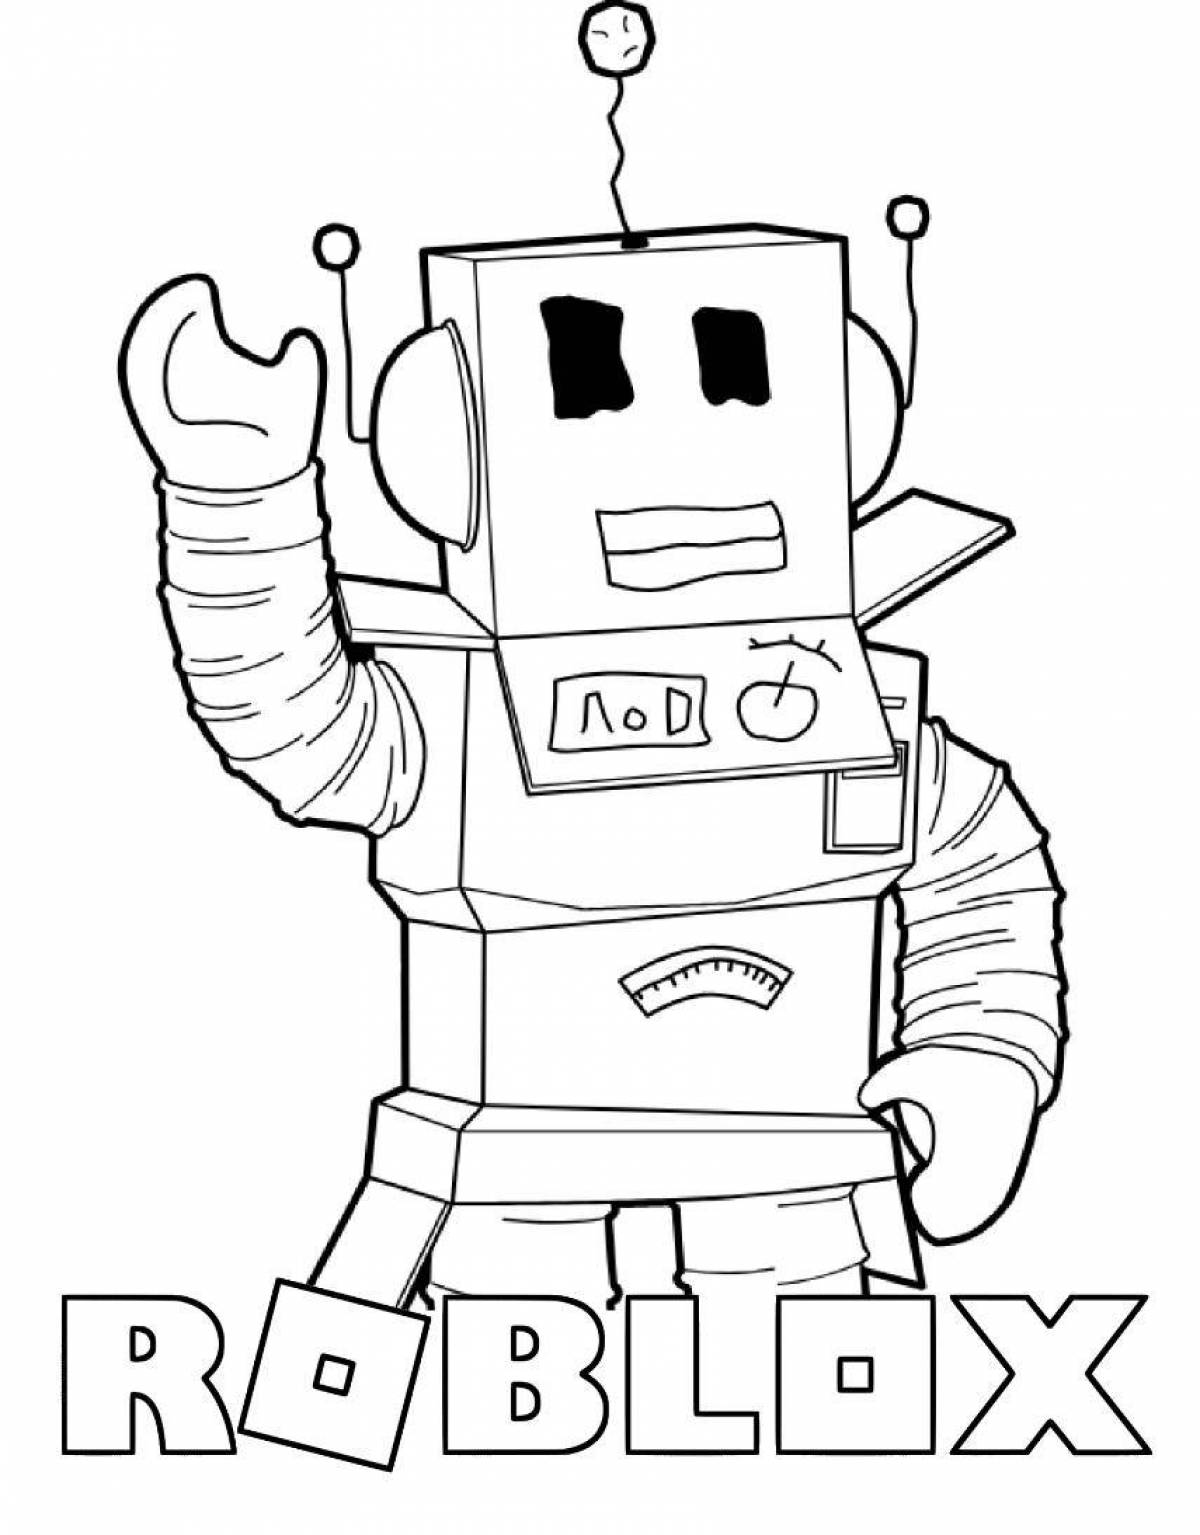 Roblox people girls colorful coloring page